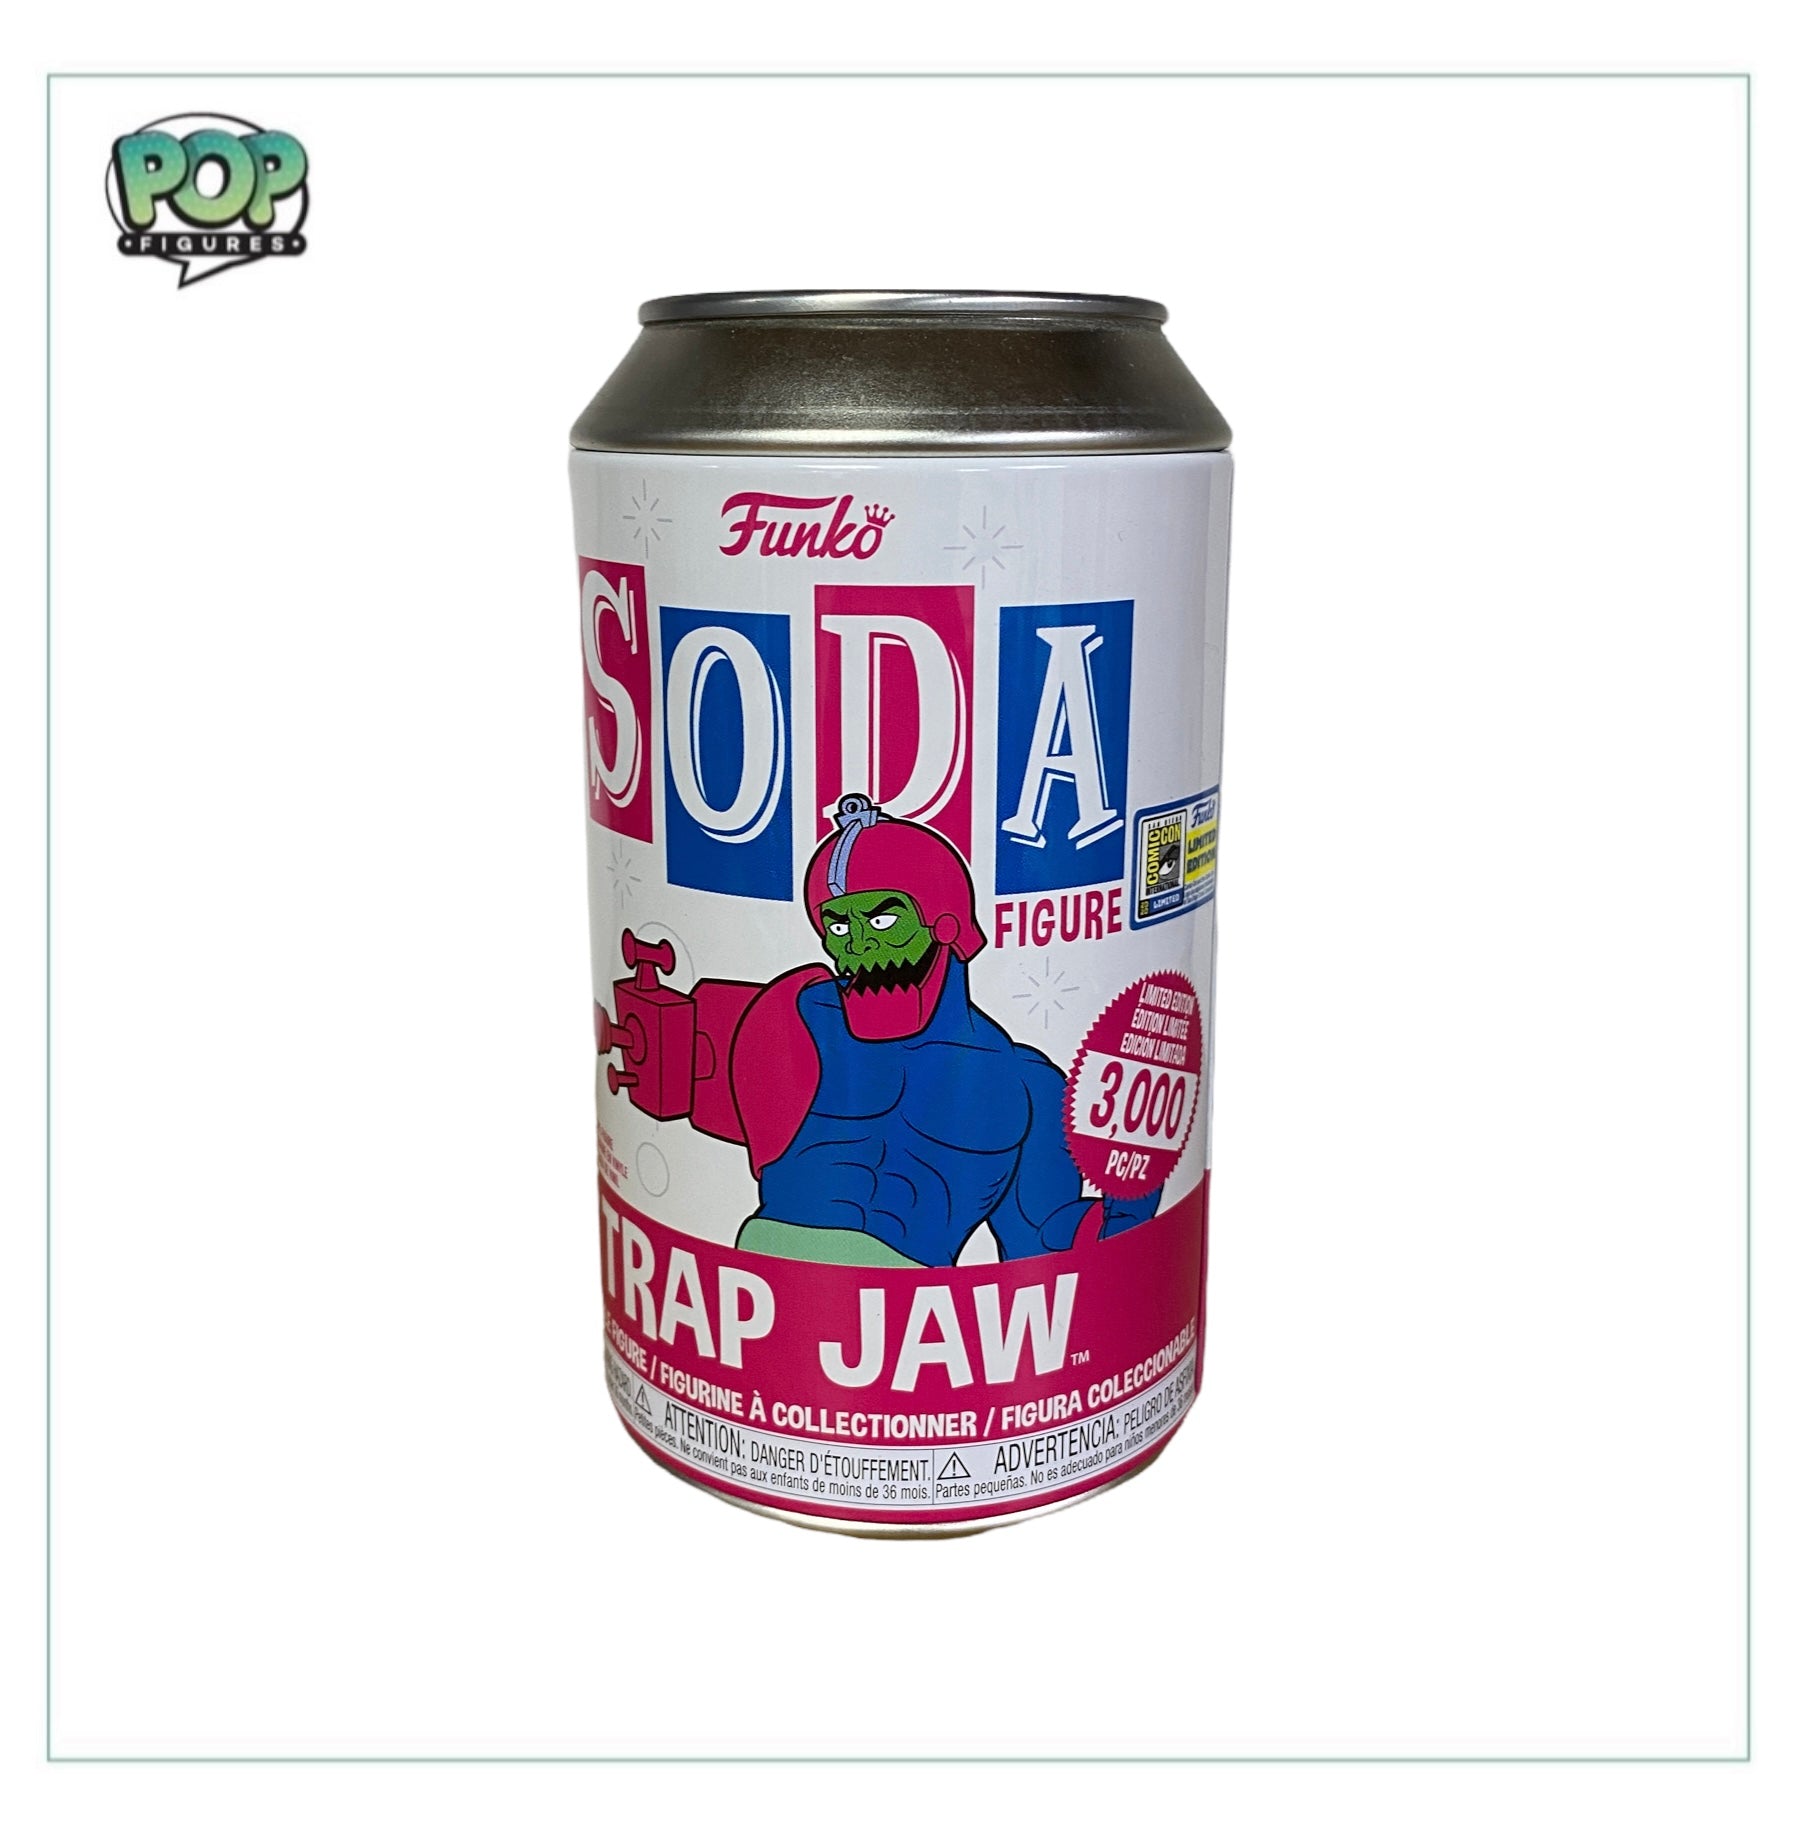 Trap Jaw Funko Soda Vinyl Figure - Masters Of The Universe - SDCC 2020 Official Convention Exclusive LE1/3000